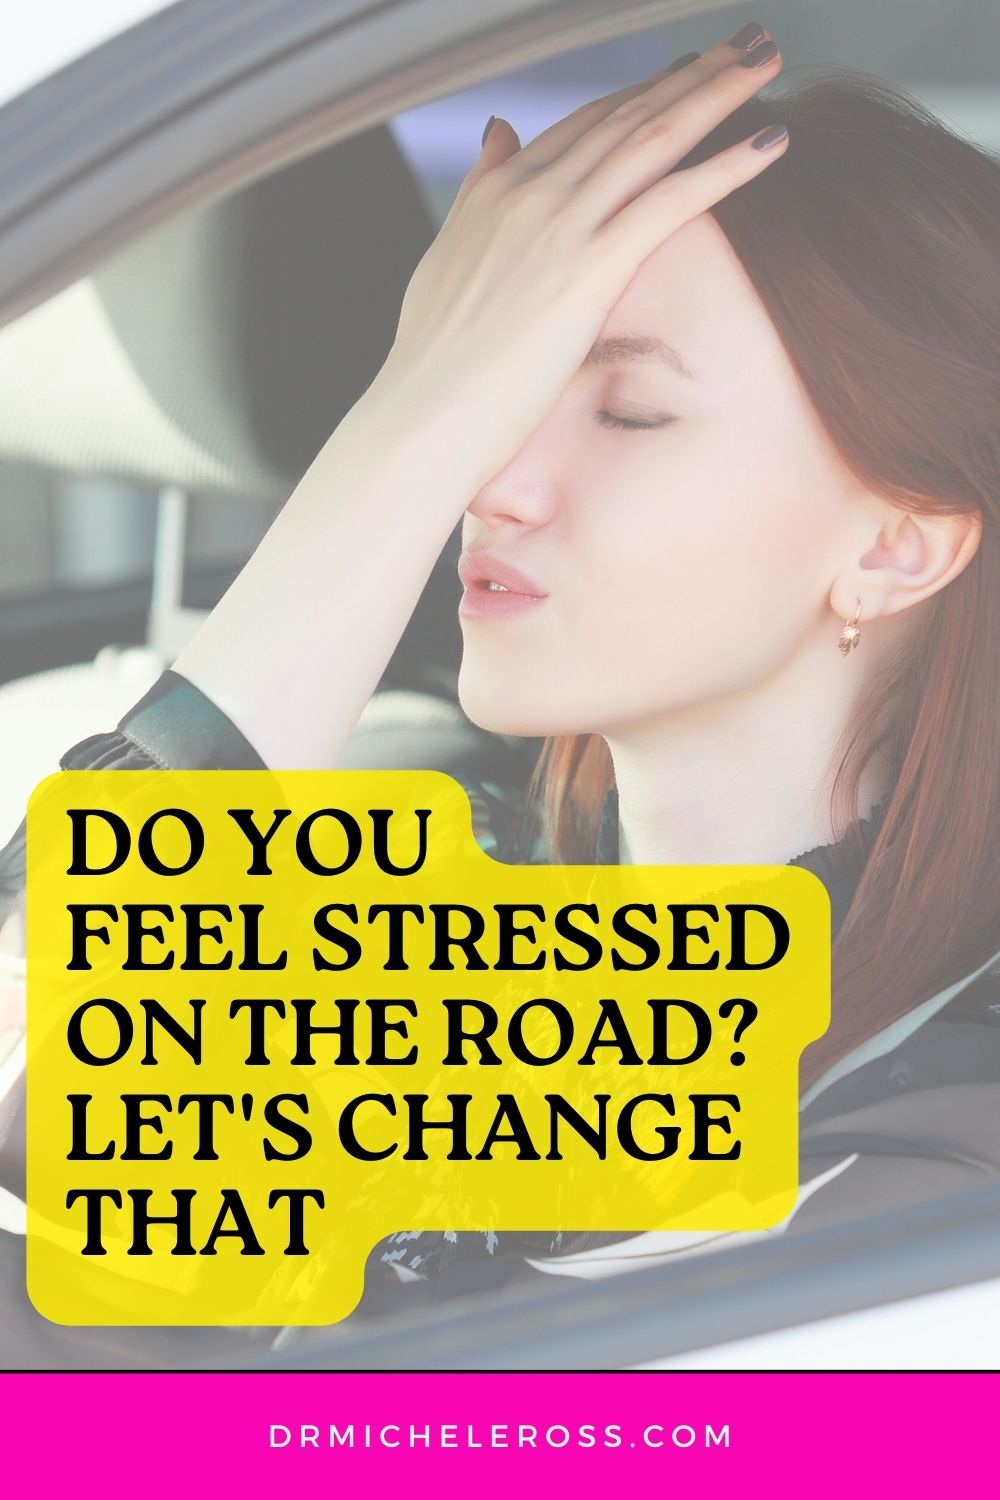 Do You Feel Stressed On The Road? Let's Change That - Pinterest Pin